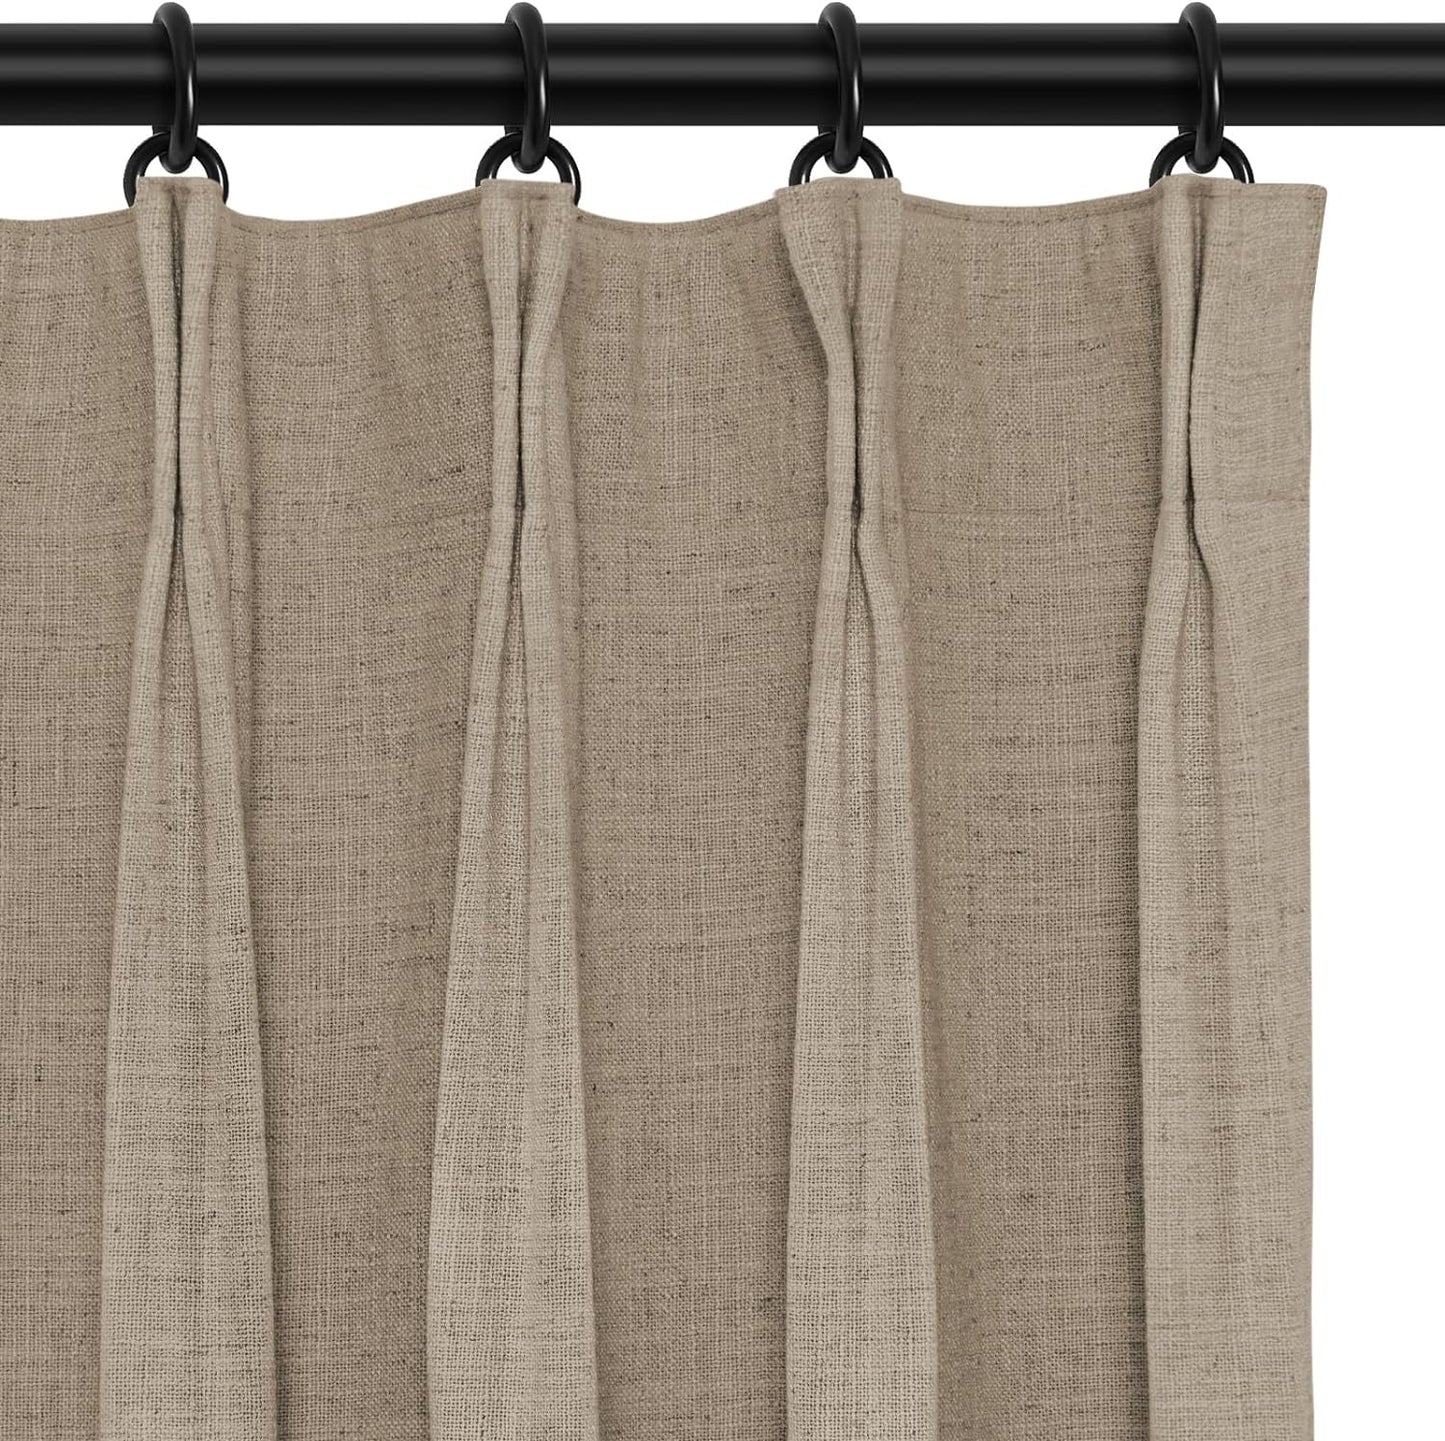 INOVADAY 100% Blackout Curtains for Bedroom, Pinch Pleated Linen Blackout Curtains 96 Inch Length 2 Panels Set, Thermal Room Darkening Linen Curtain Drapes for Living Room, W40 X L96,Beige White  INOVADAY Dark Flax 40"W X 84"L-2 Panels 